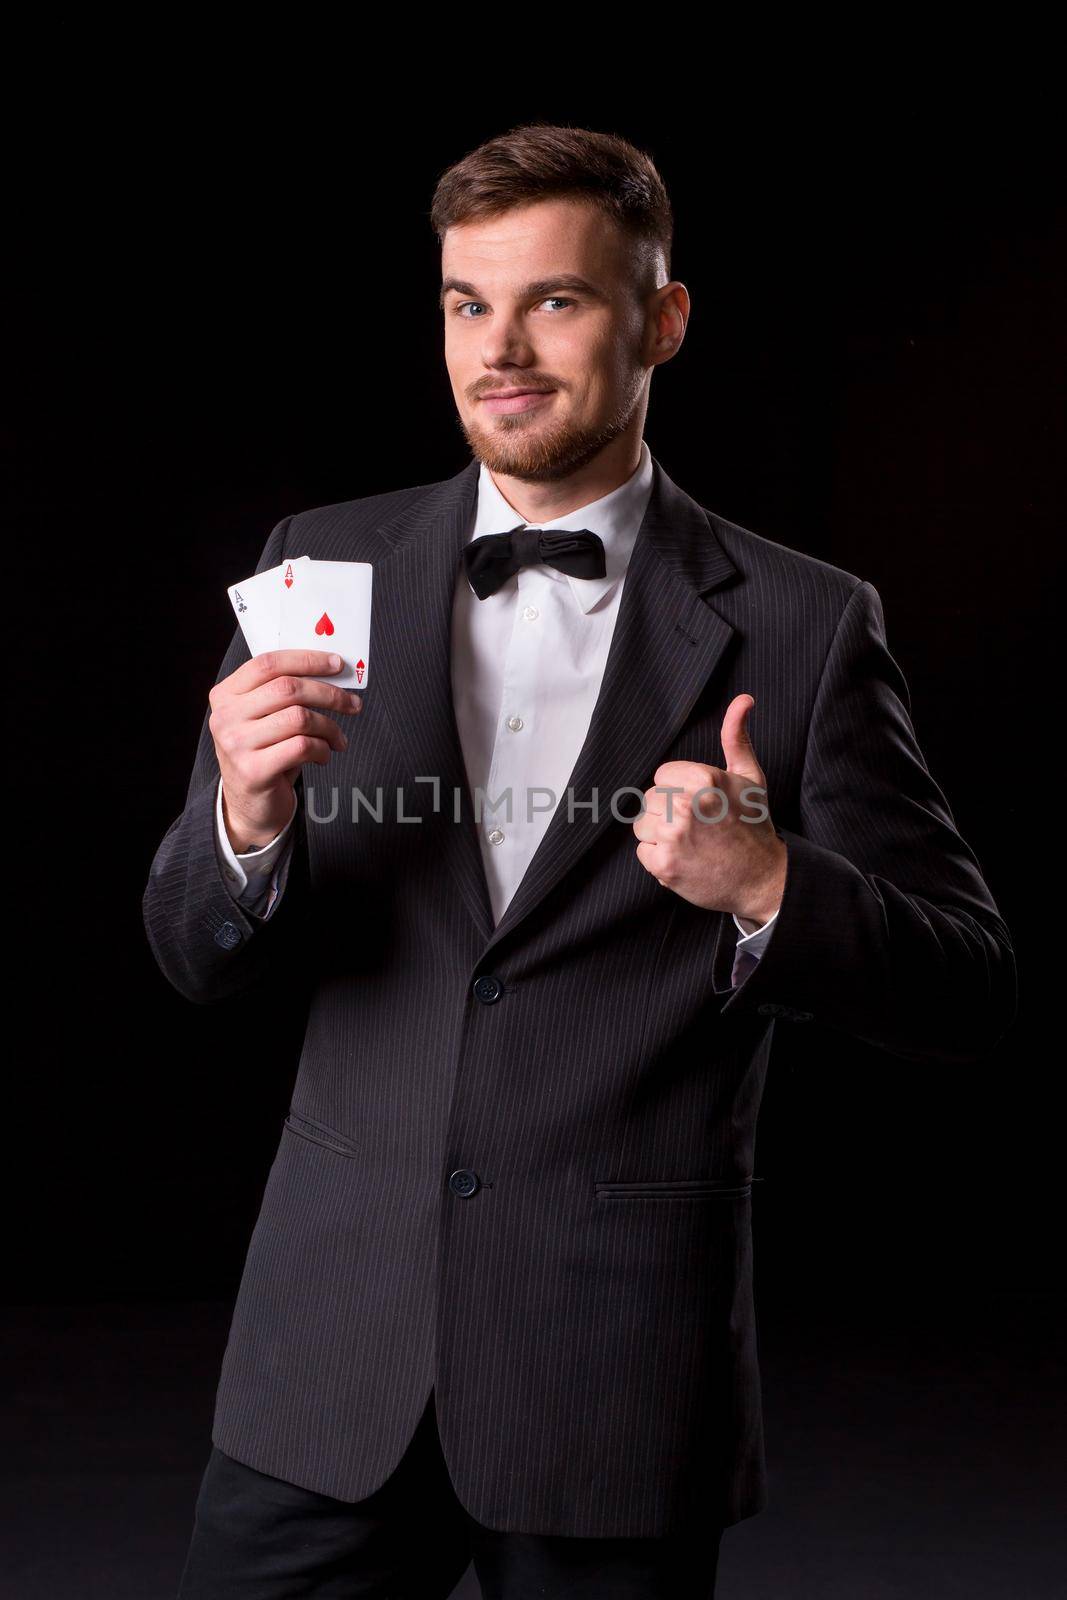 man in a suit posing with cards by nazarovsergey